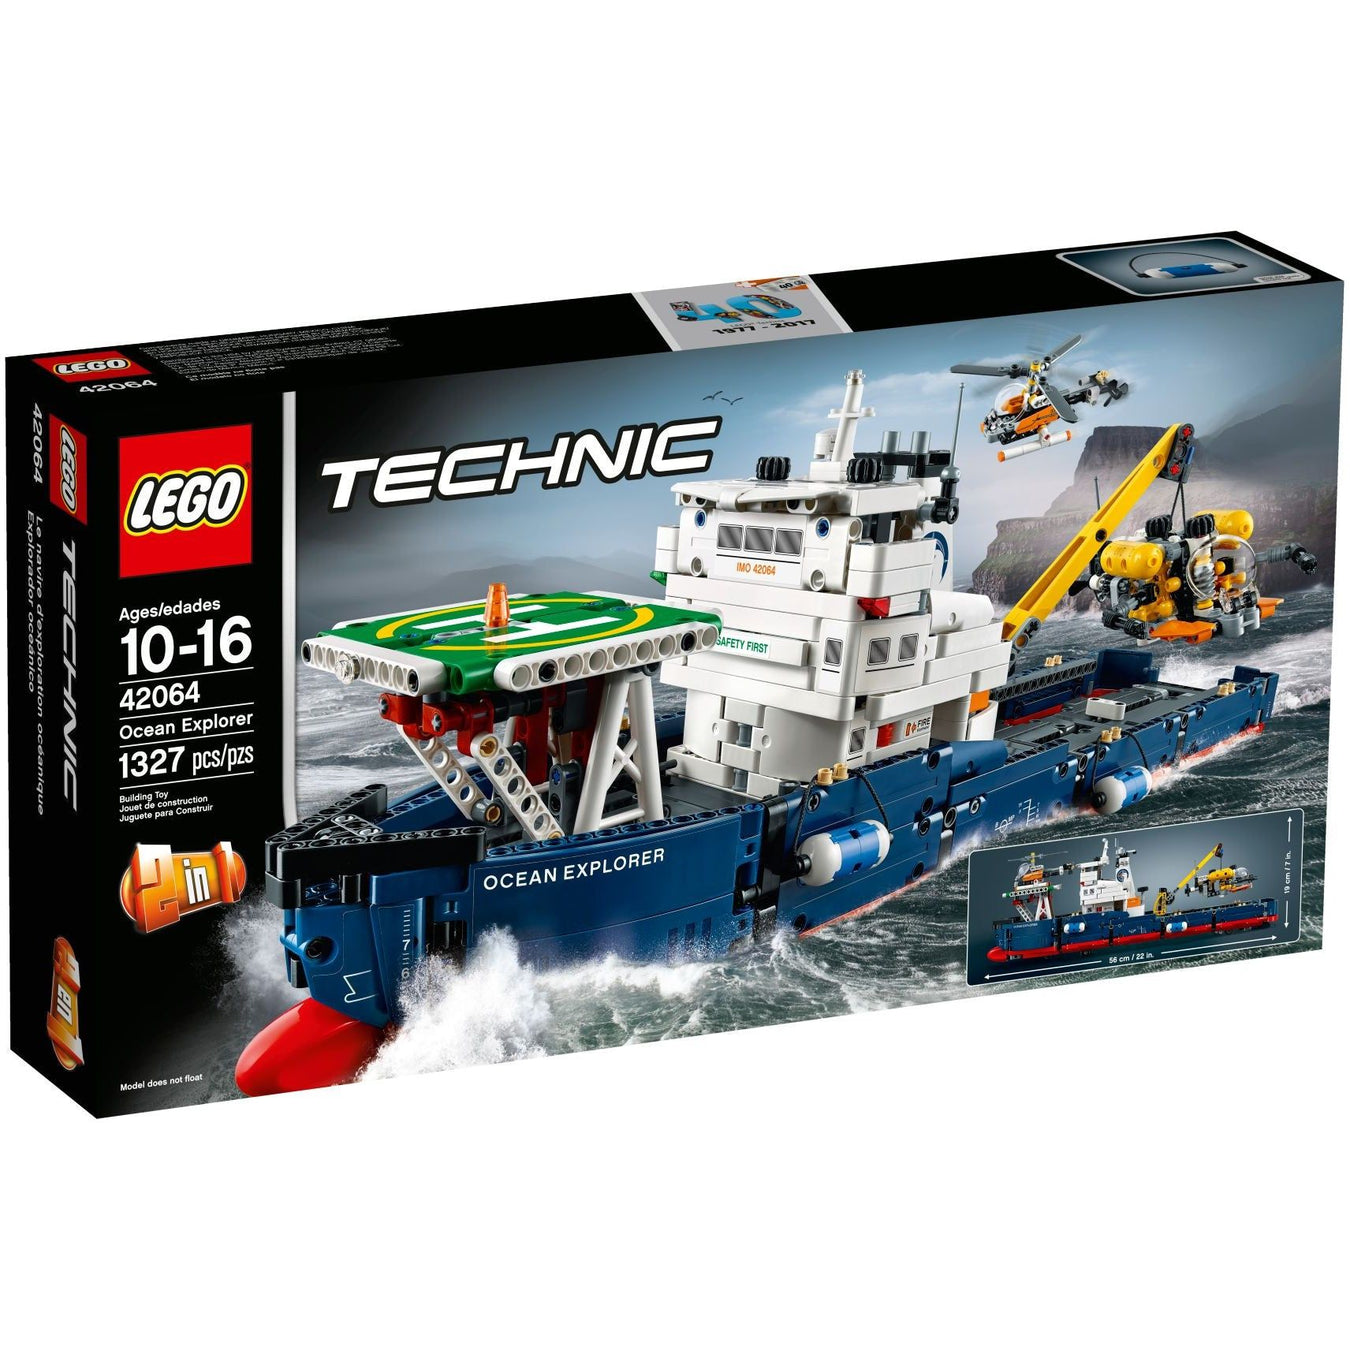 All LEGO products